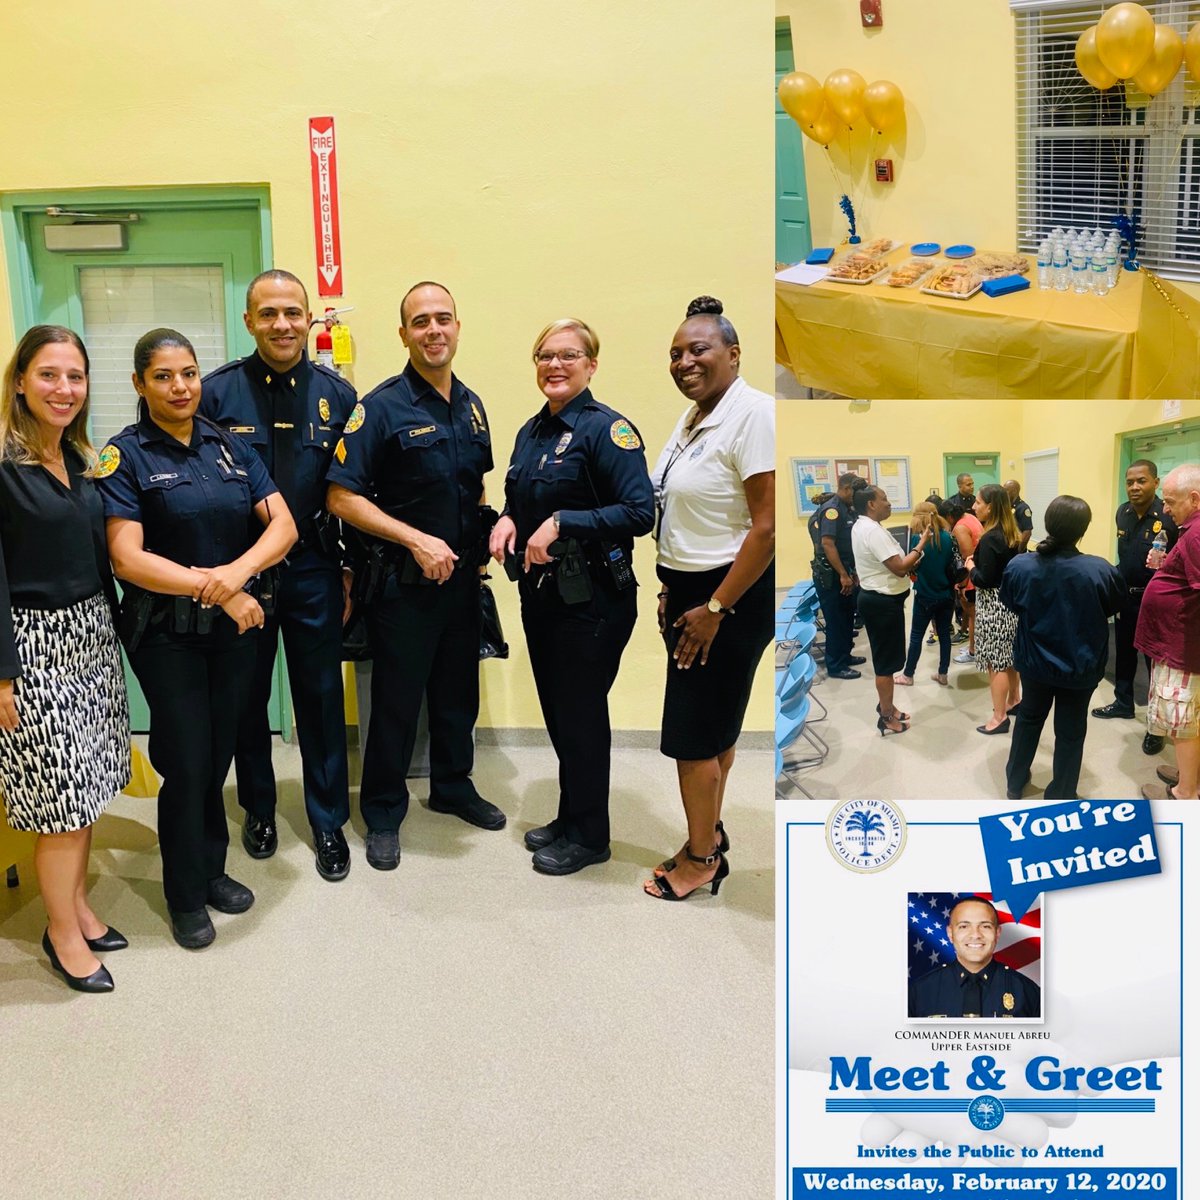 Thanks to all the residents who came out and showed support to our new upper east side Net commander!! #safestcity #uppereastside #meetandgreet